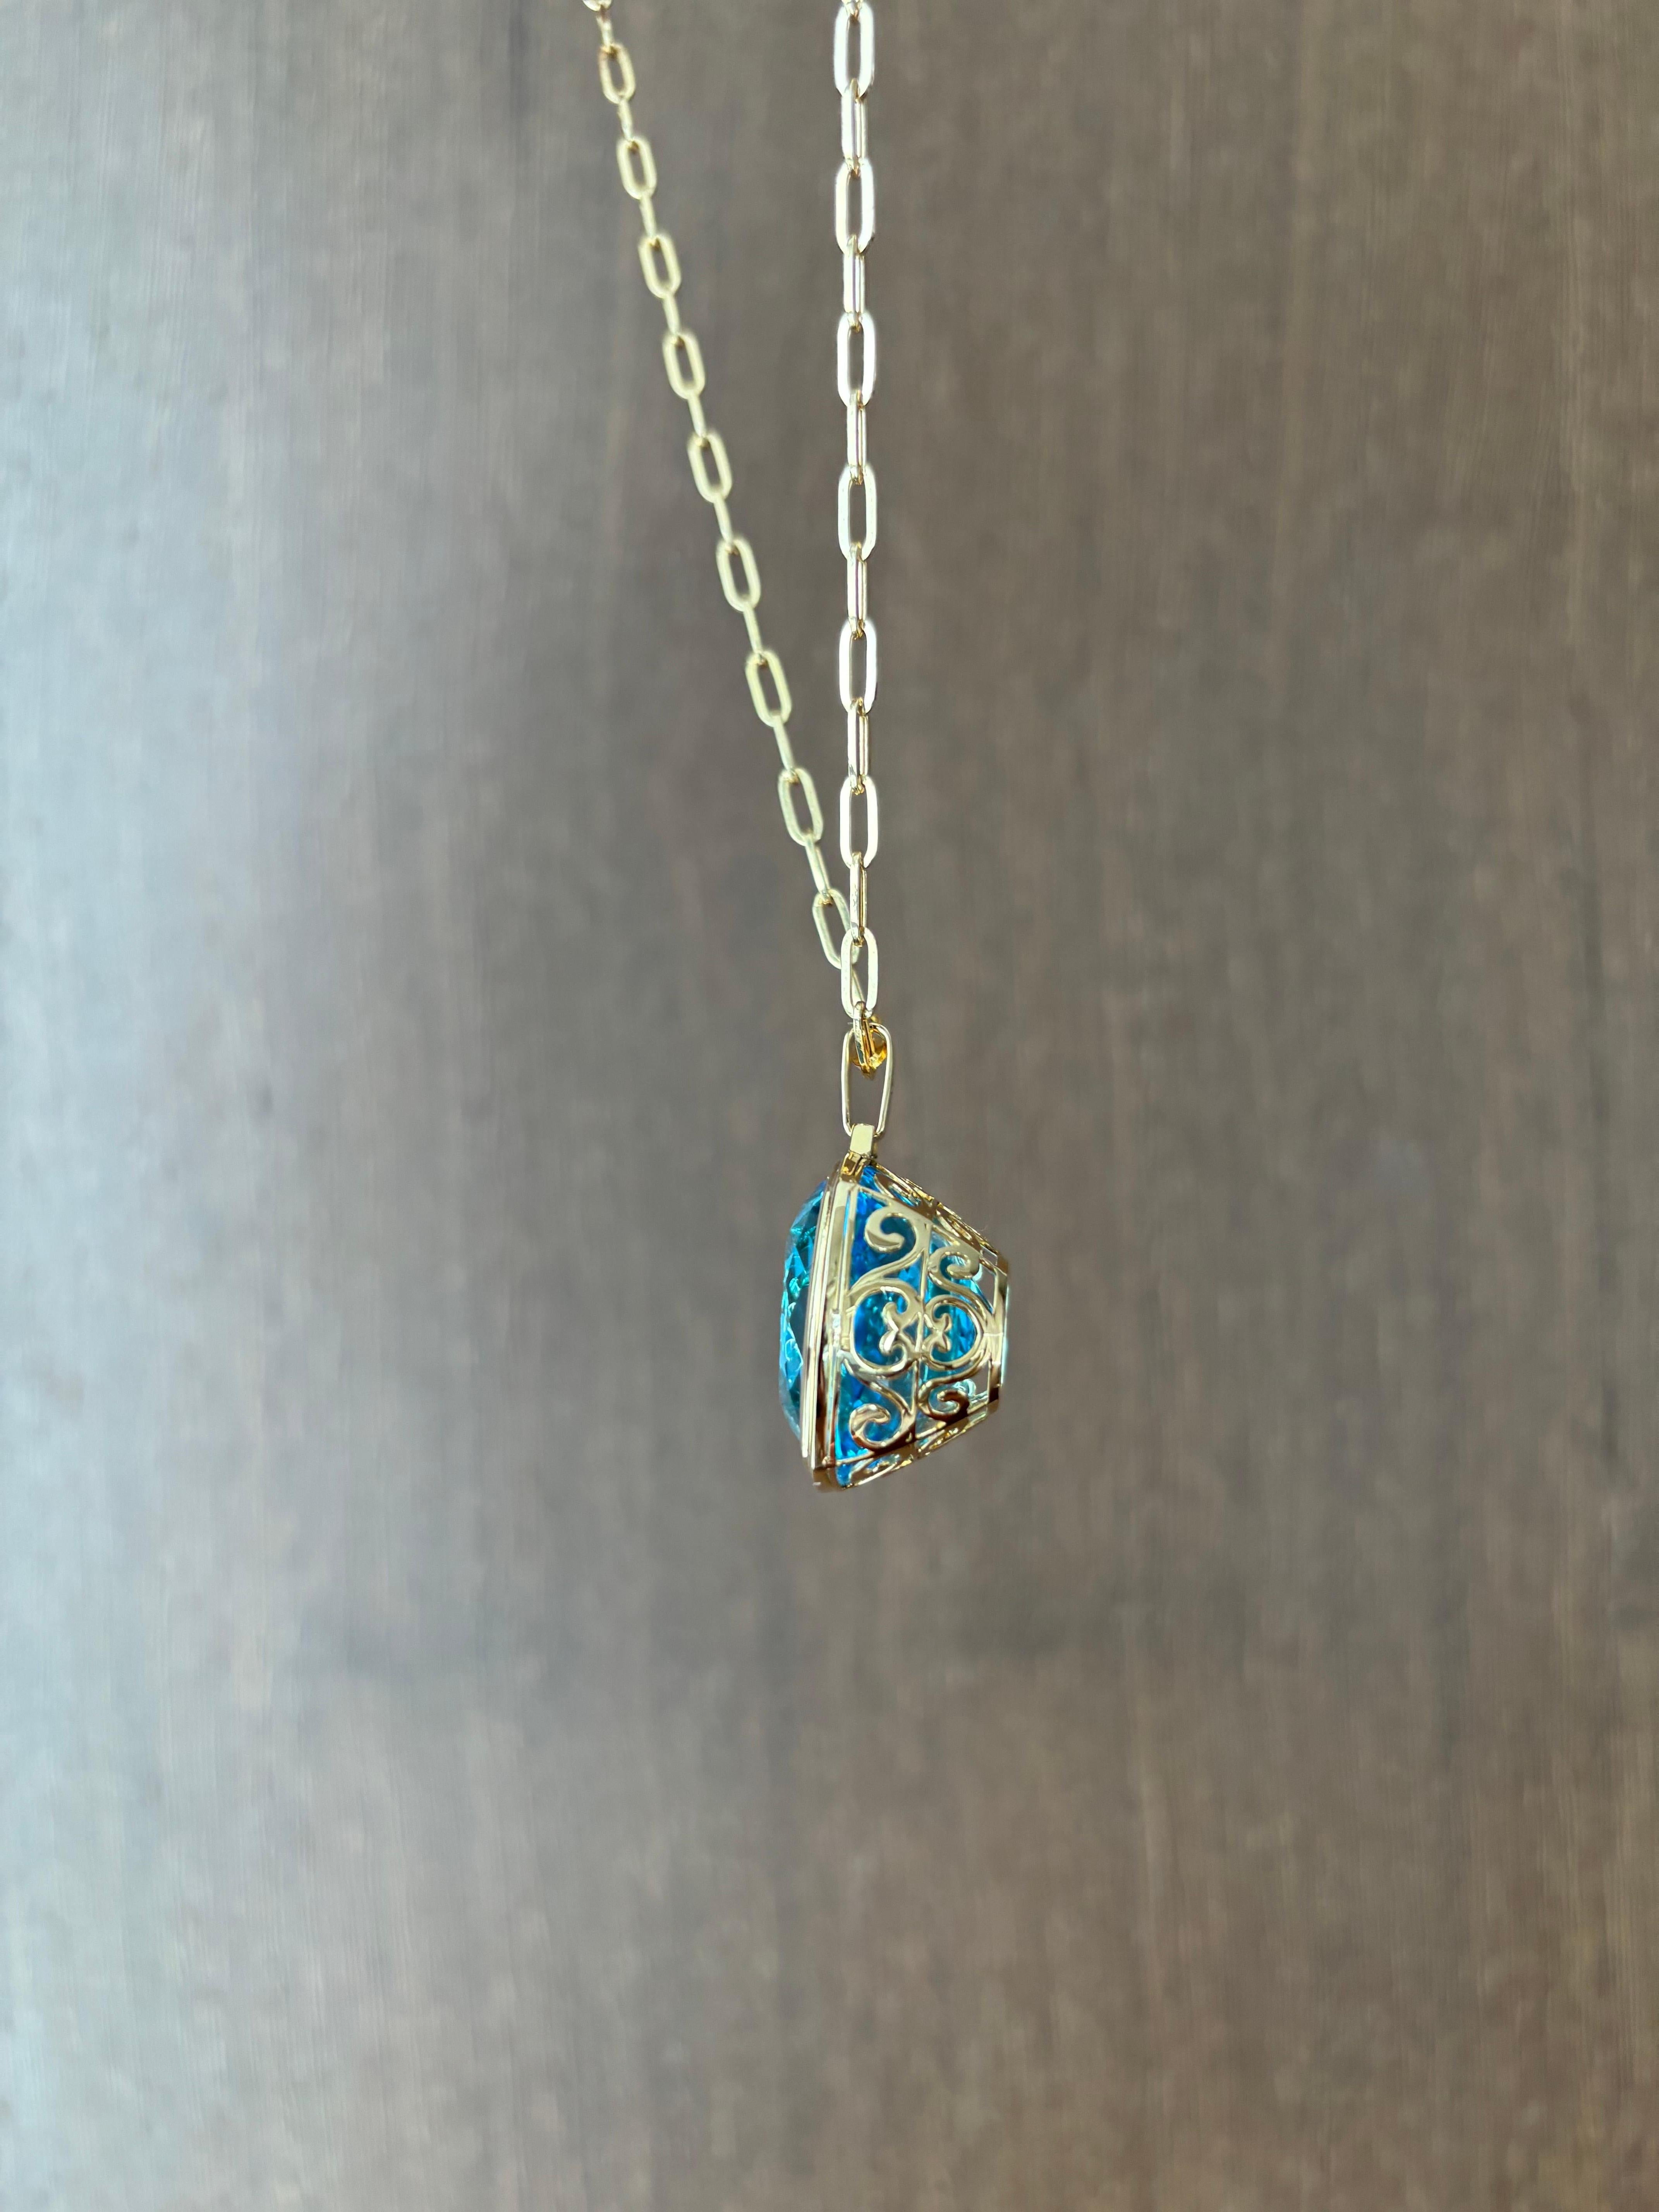 A stunning, bright blue 82.46 carat cushion shaped Blue Topaz pendant, bezel set in 18K yellow gold. The natural gemstone is absolutely transparent with no inclusions, and a beautiful vivid blue color, and great luster. 
The Blue Topaz is set in